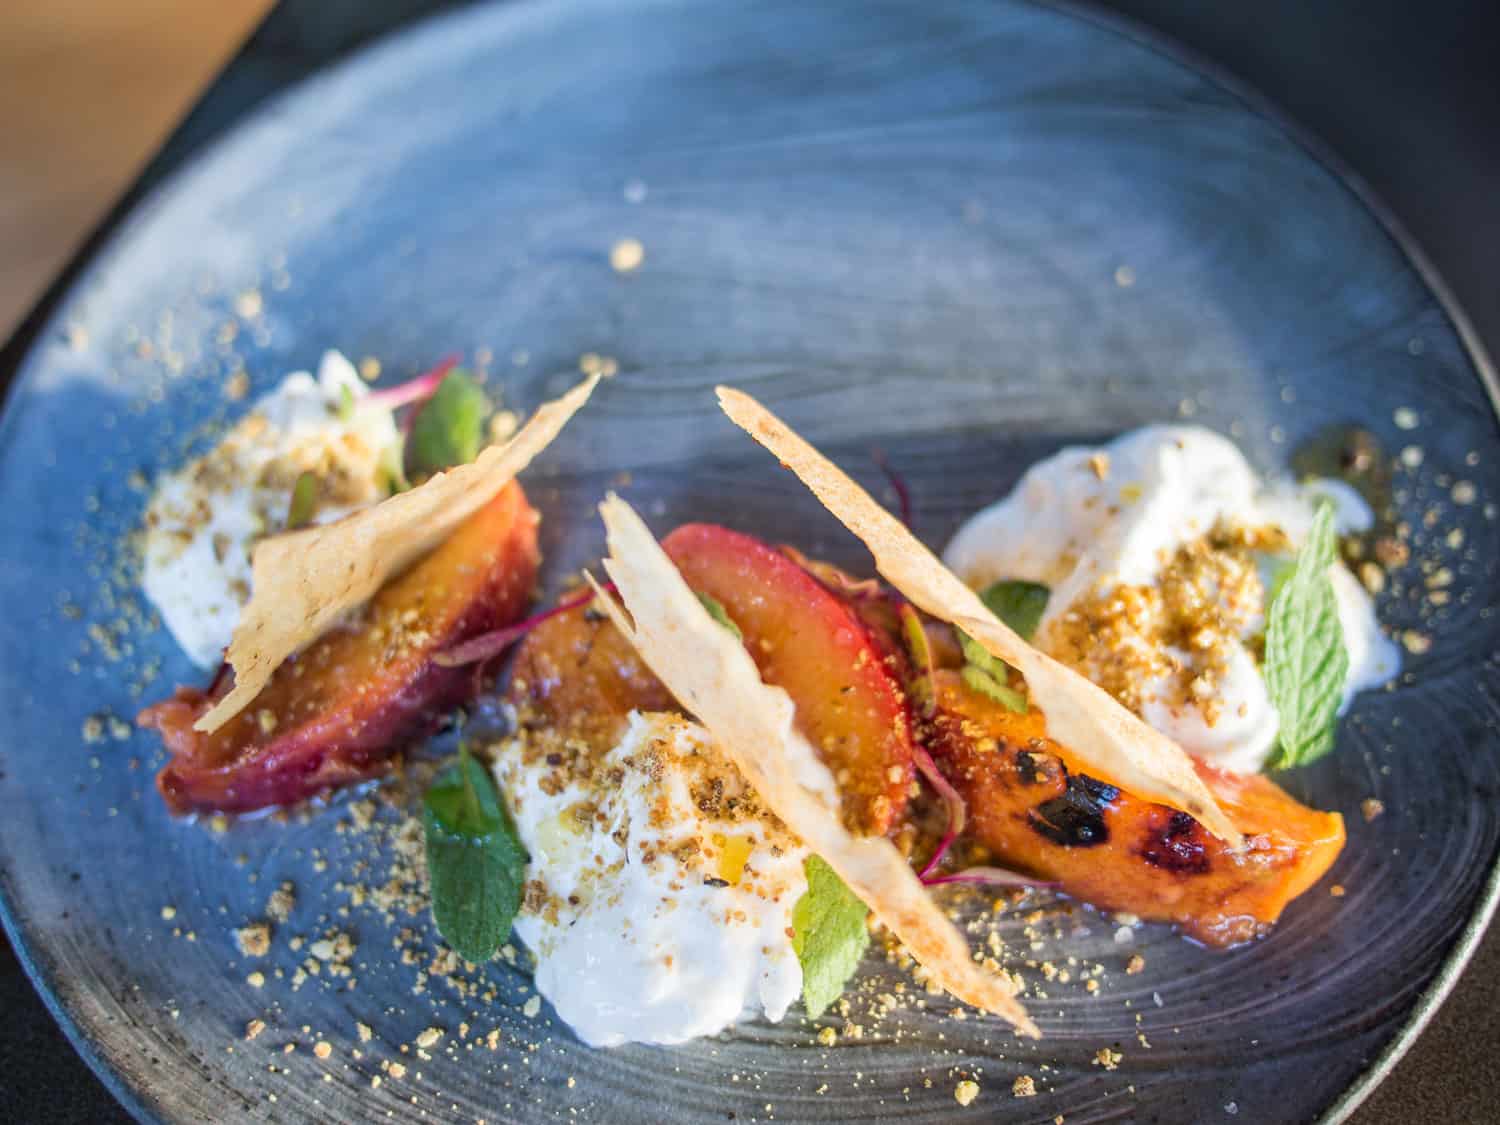 Burrata, grilled nectarines and pistachio dukkah from the vegetarian tapa menu at The Pot Luck Club in Cape Town